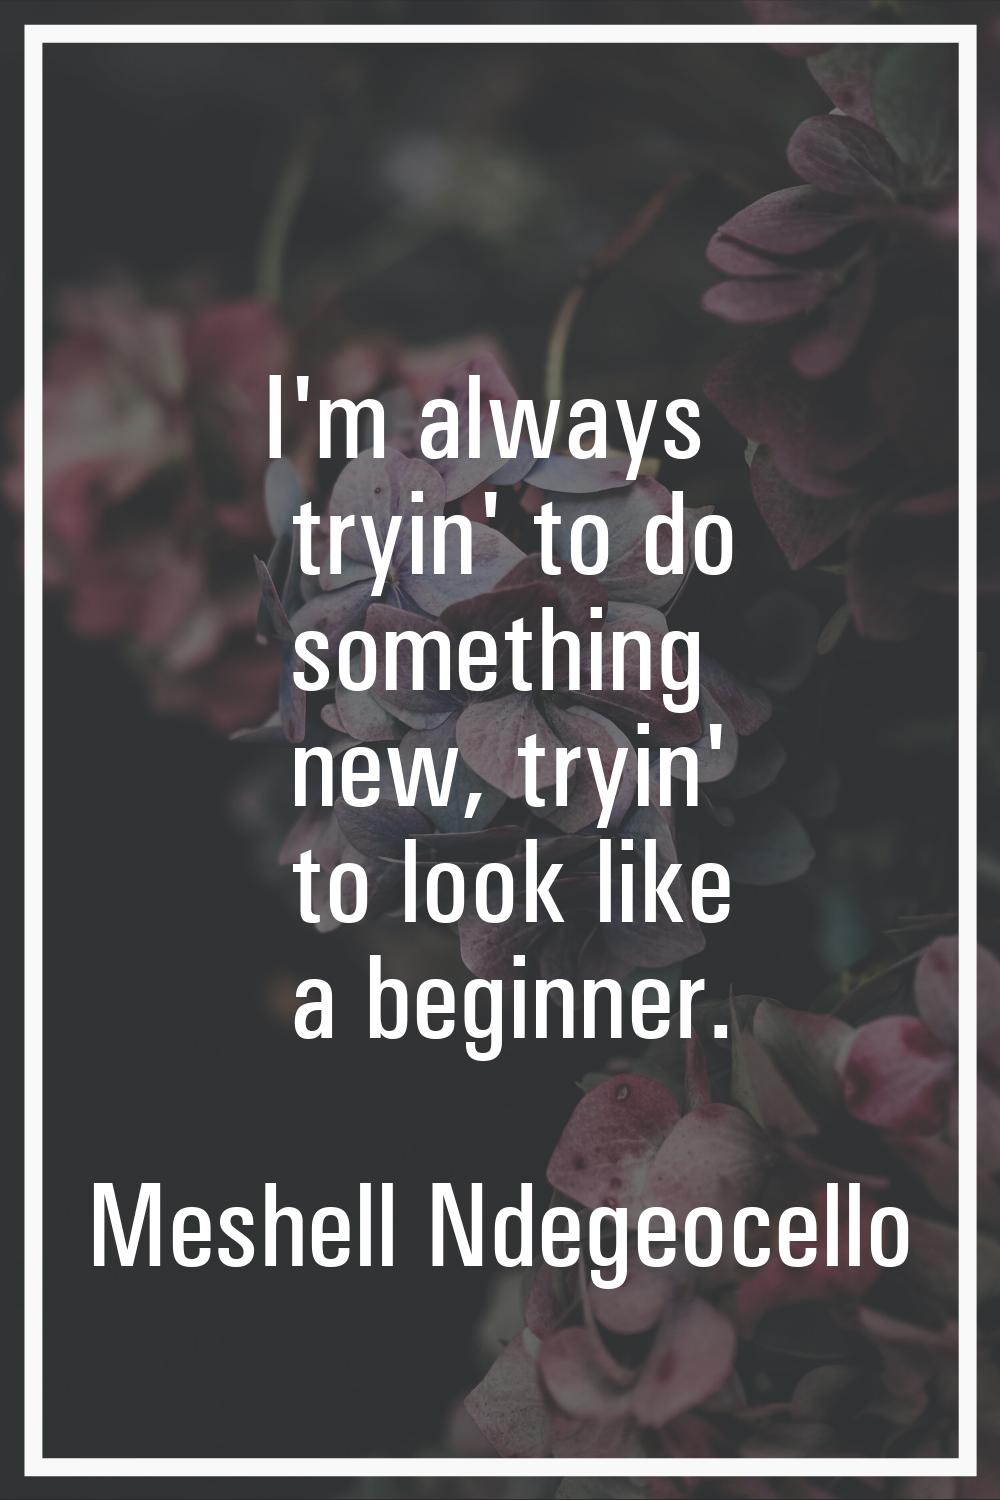 I'm always tryin' to do something new, tryin' to look like a beginner.